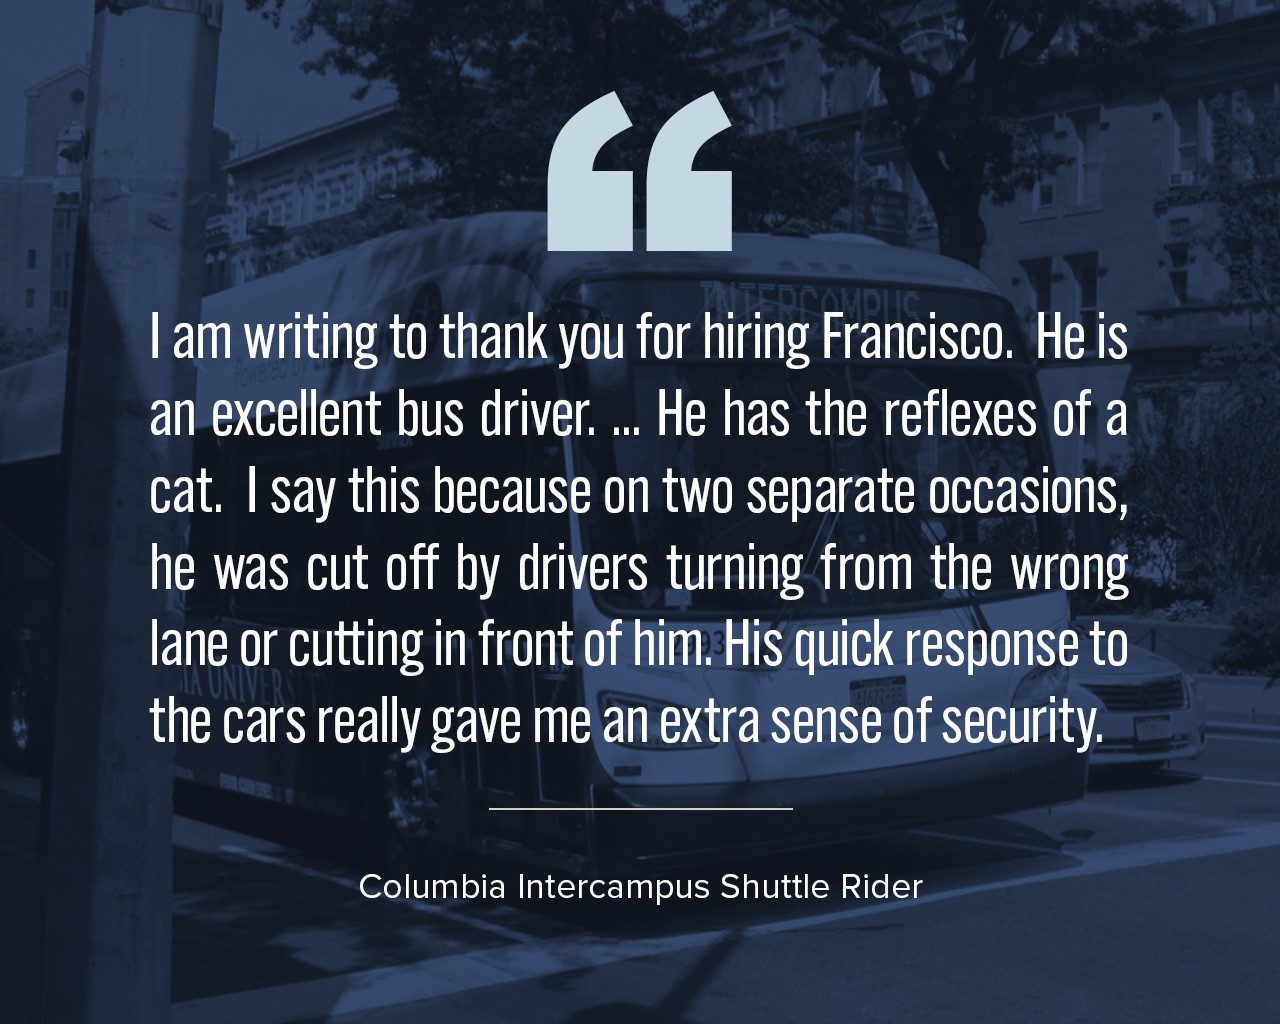 A quote that reads, "I am writing to thank you for hiring Francisco.  He is an excellent bus driver. ... He has the reflexes of a cat.  I say this because on two separate occasions, he was cut off by drivers turning from the wrong lane or cutting in front of him. His quick response to the cars really gave me an extra sense of security."